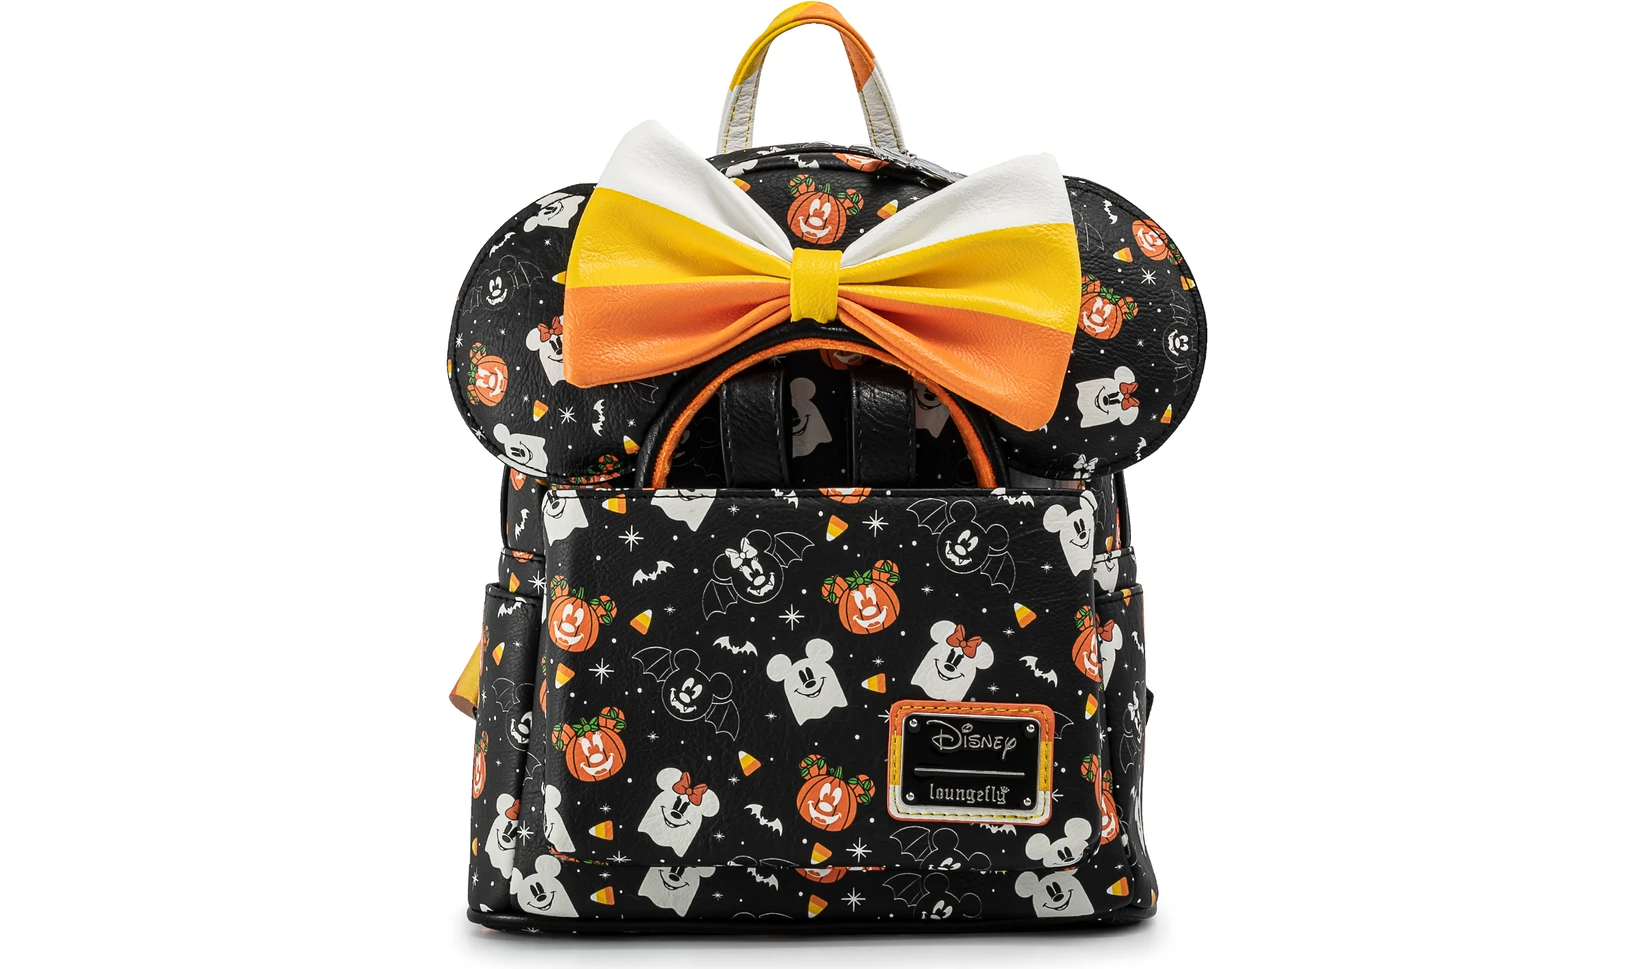 NEW Loungefly Disney Halloween Collection Just Dropped and It's 